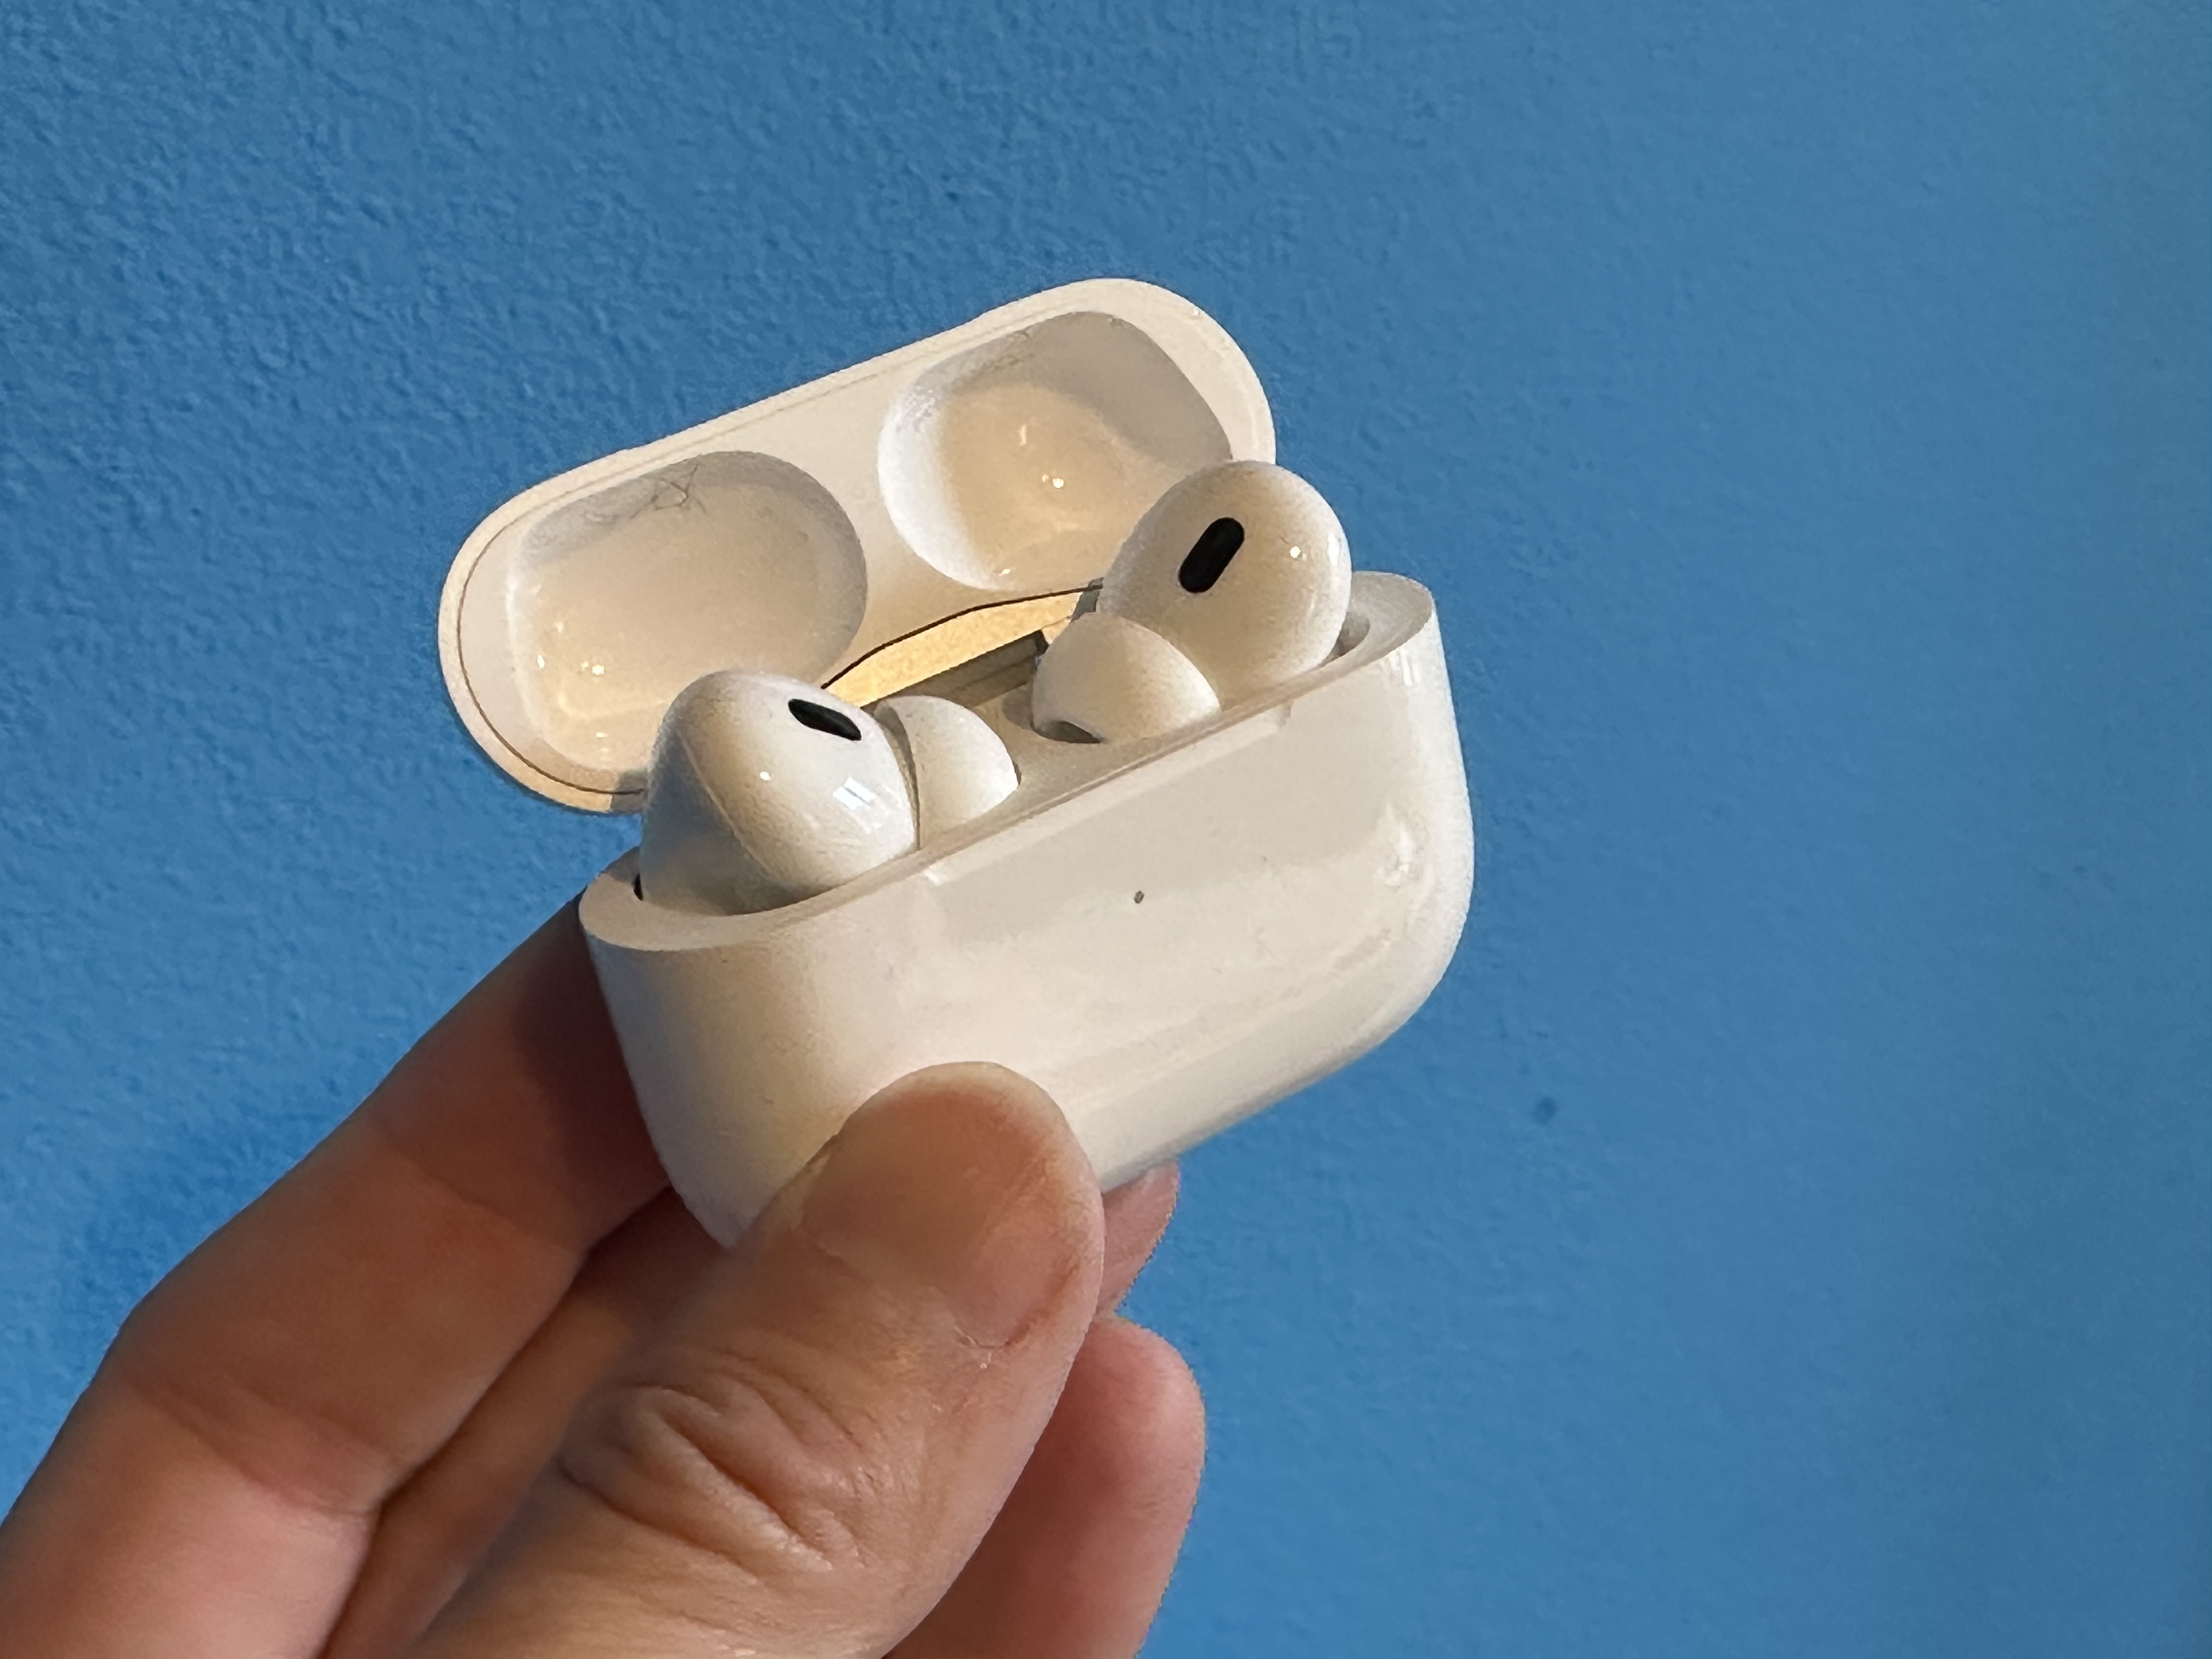 Apple AirPods: Review